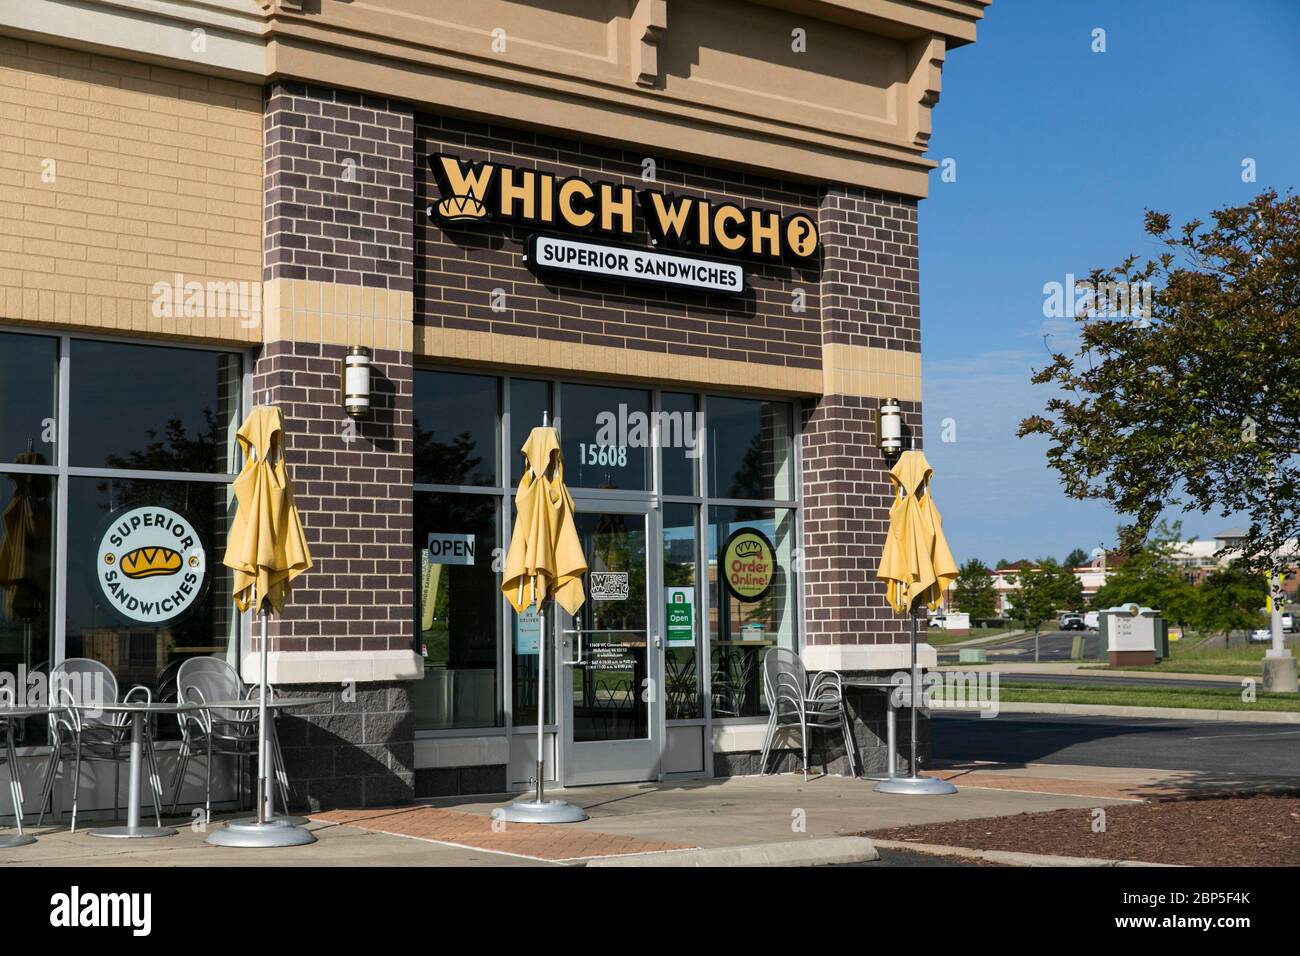 A logo sign outside of a Which Wich Superior Sandwiches restaurant location in Midlothian, Virginia on May 13, 2020. Stock Photo